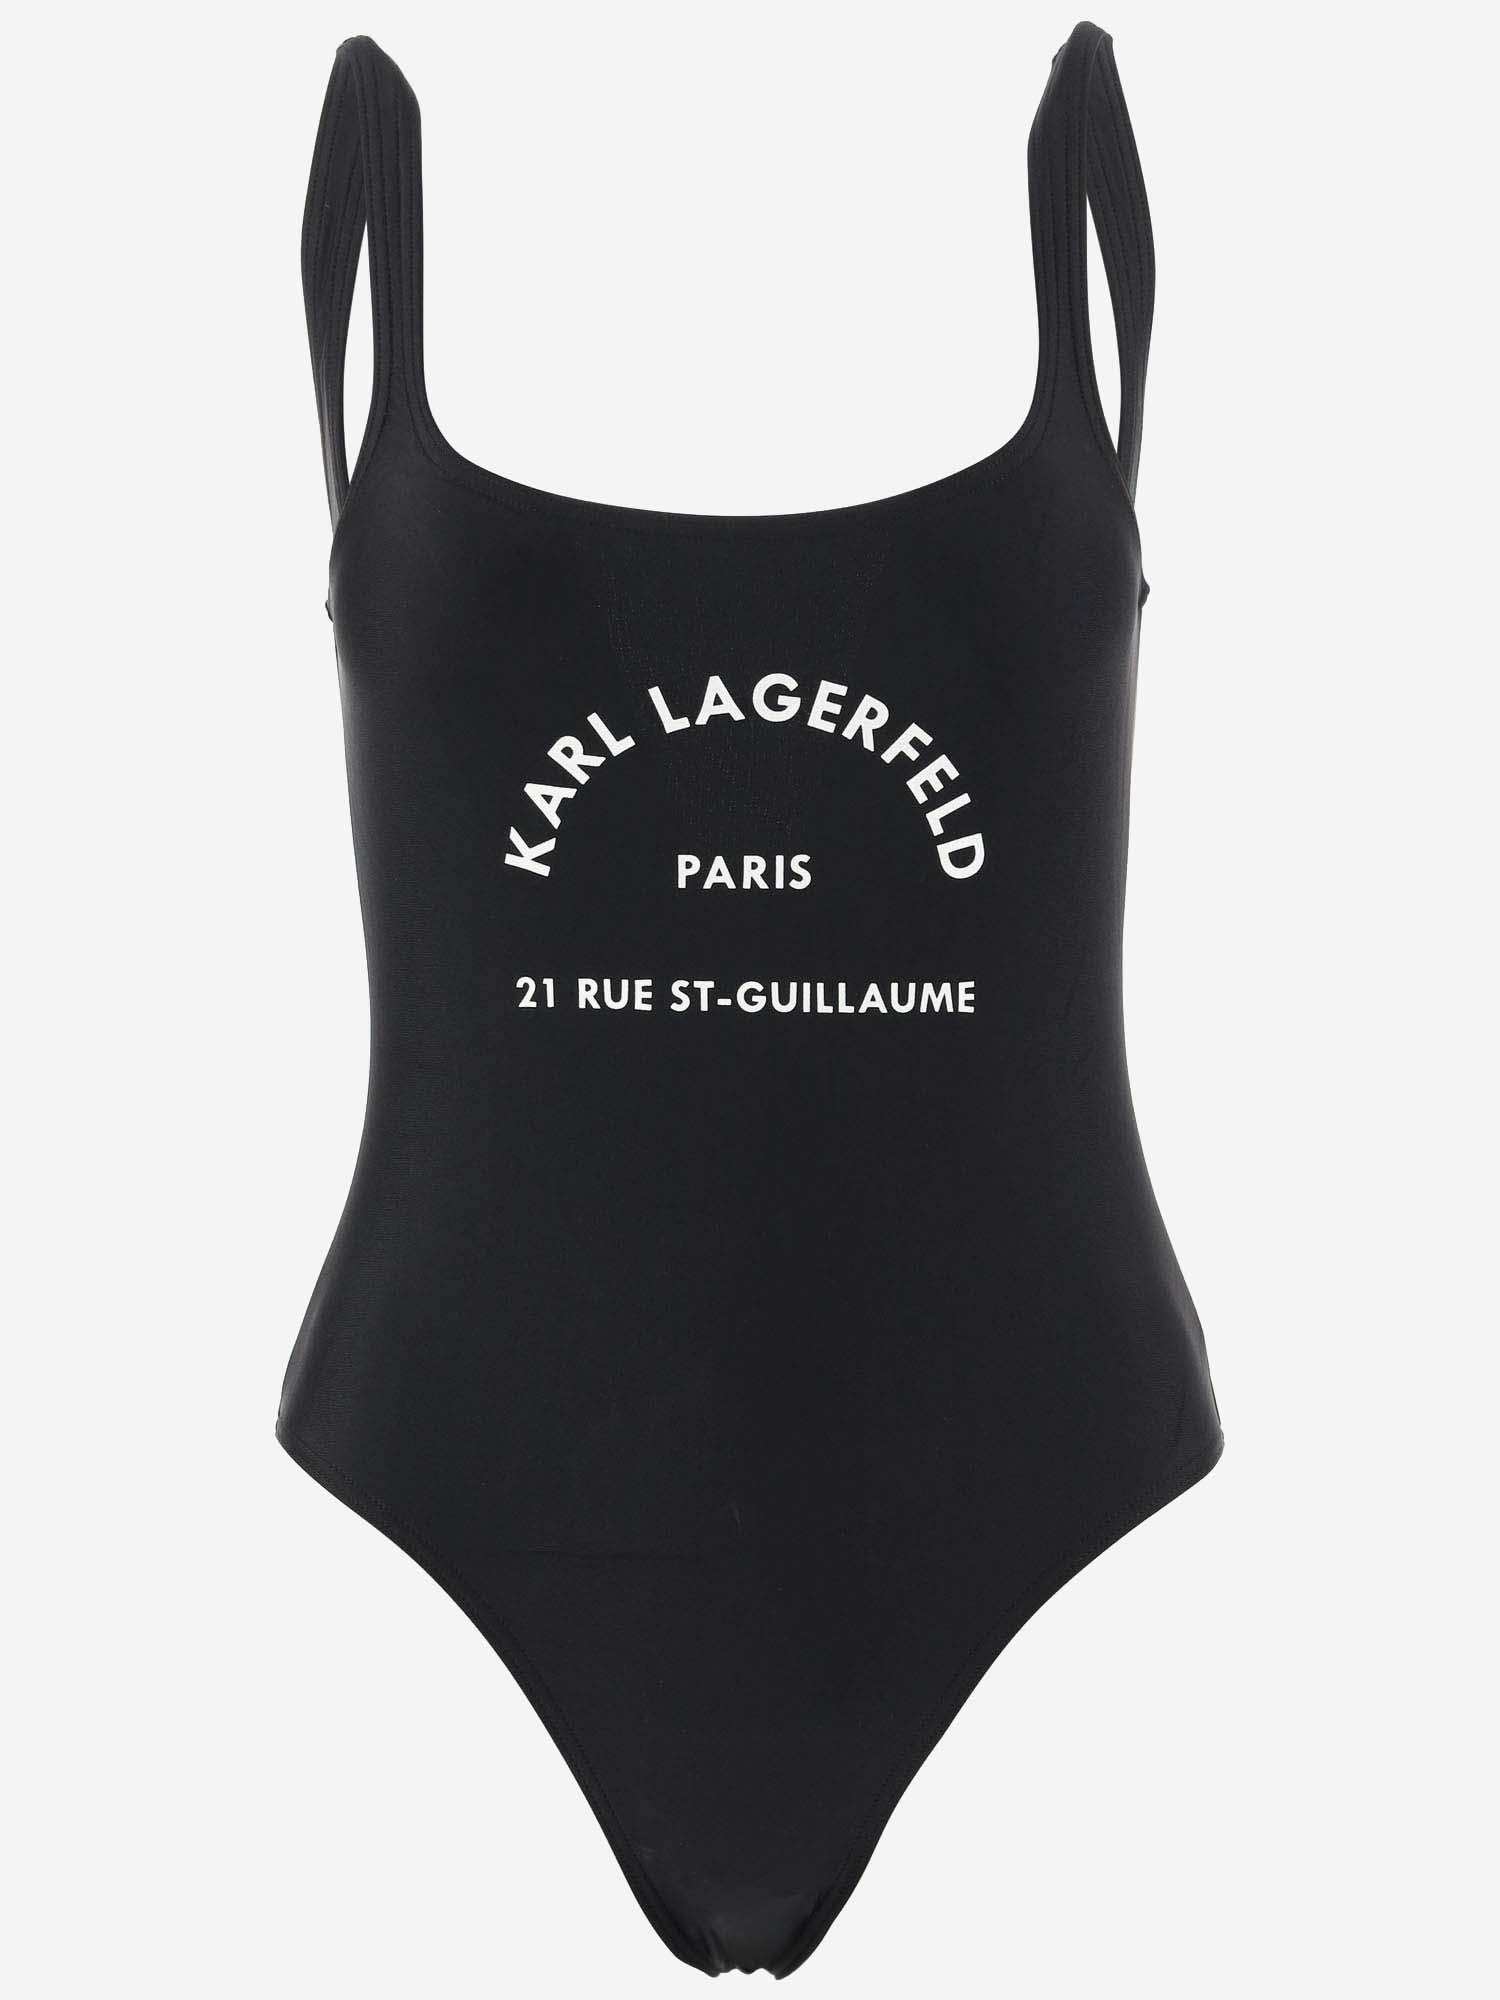 KARL LAGERFELD ONE-PIECE SWIMSUIT RUE ST-GUILLAUME